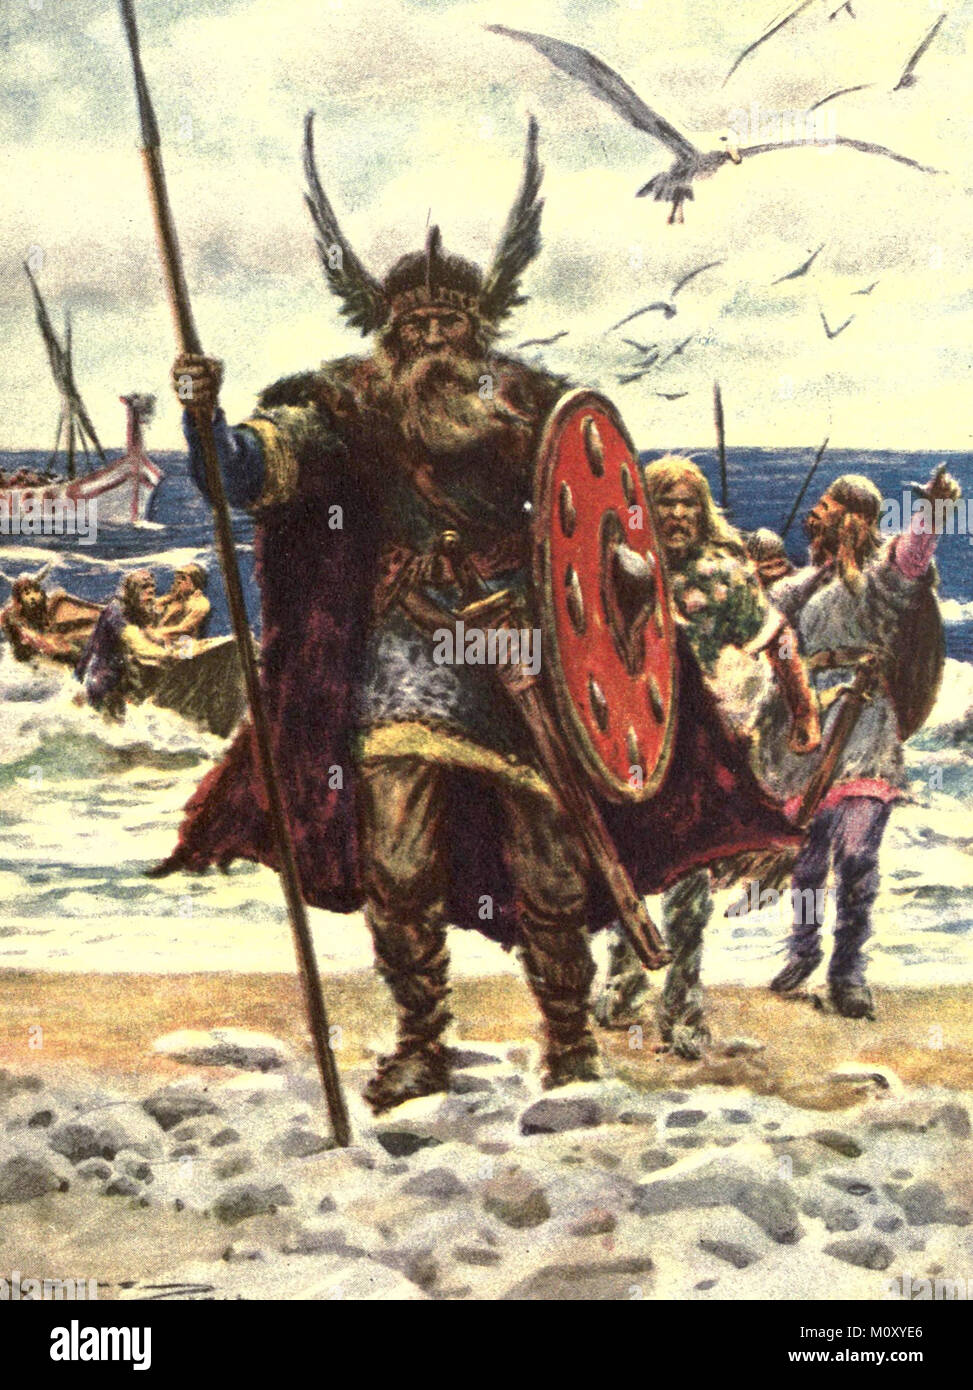 Leif Erikson Leif Eriksson, Leif Erikson, Leif Ericson (c. 970 – c. 1020) Norse explorer from Iceland. Stock Photo